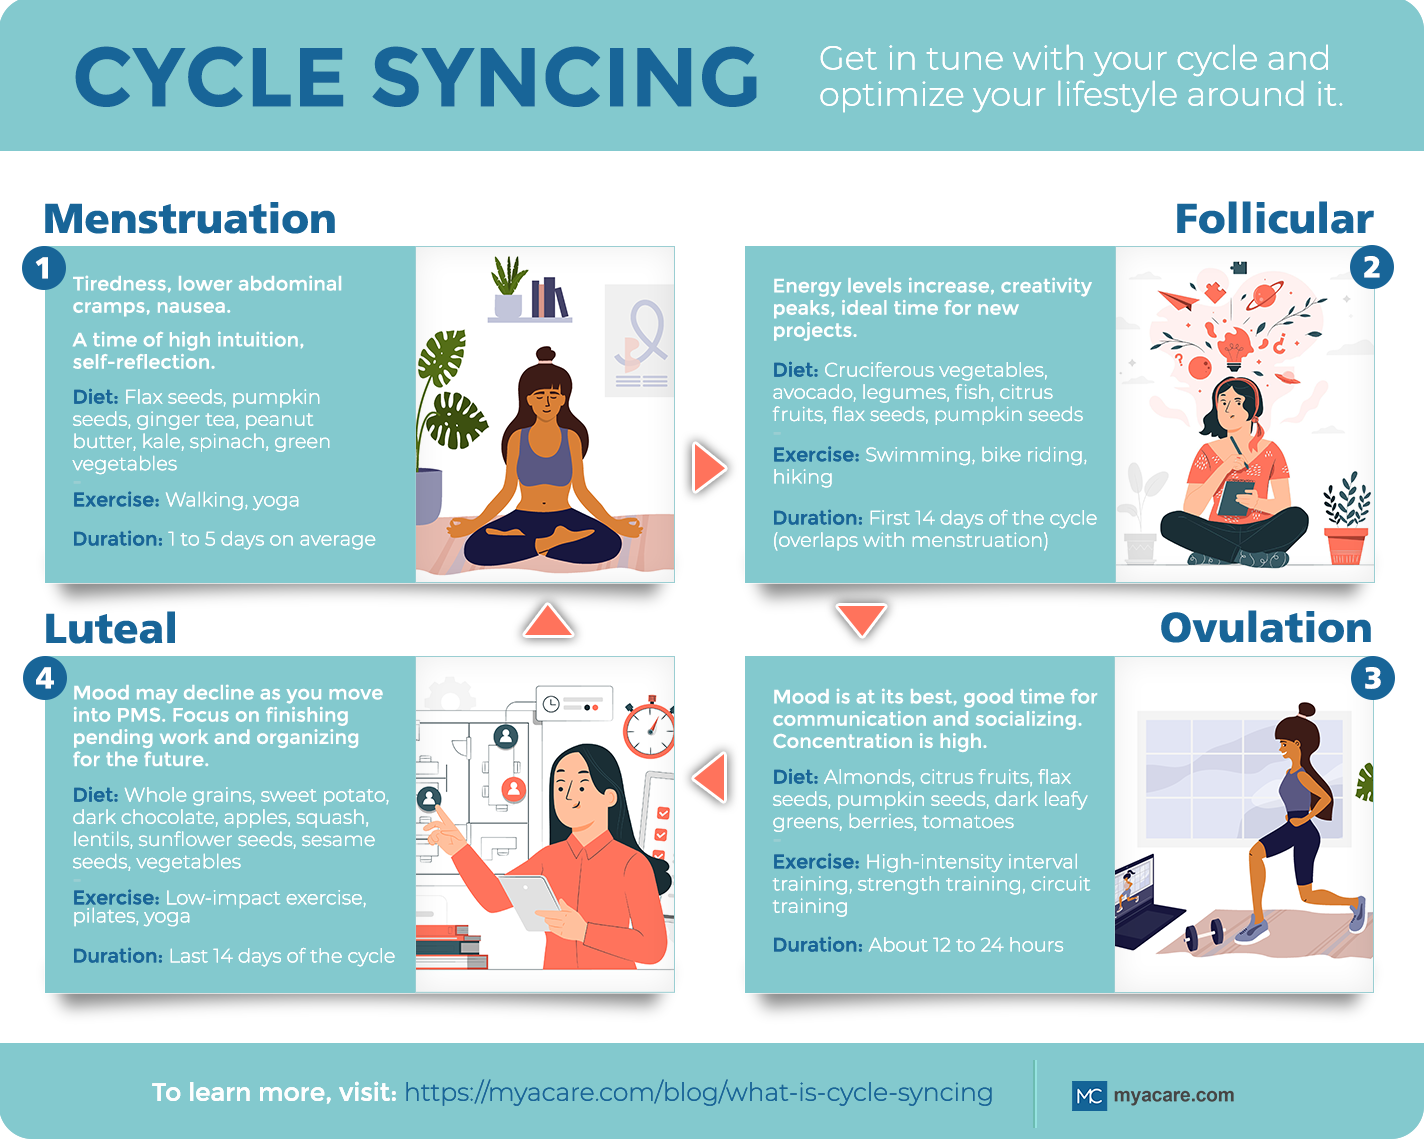 WHAT IS CYCLE SYNCING?